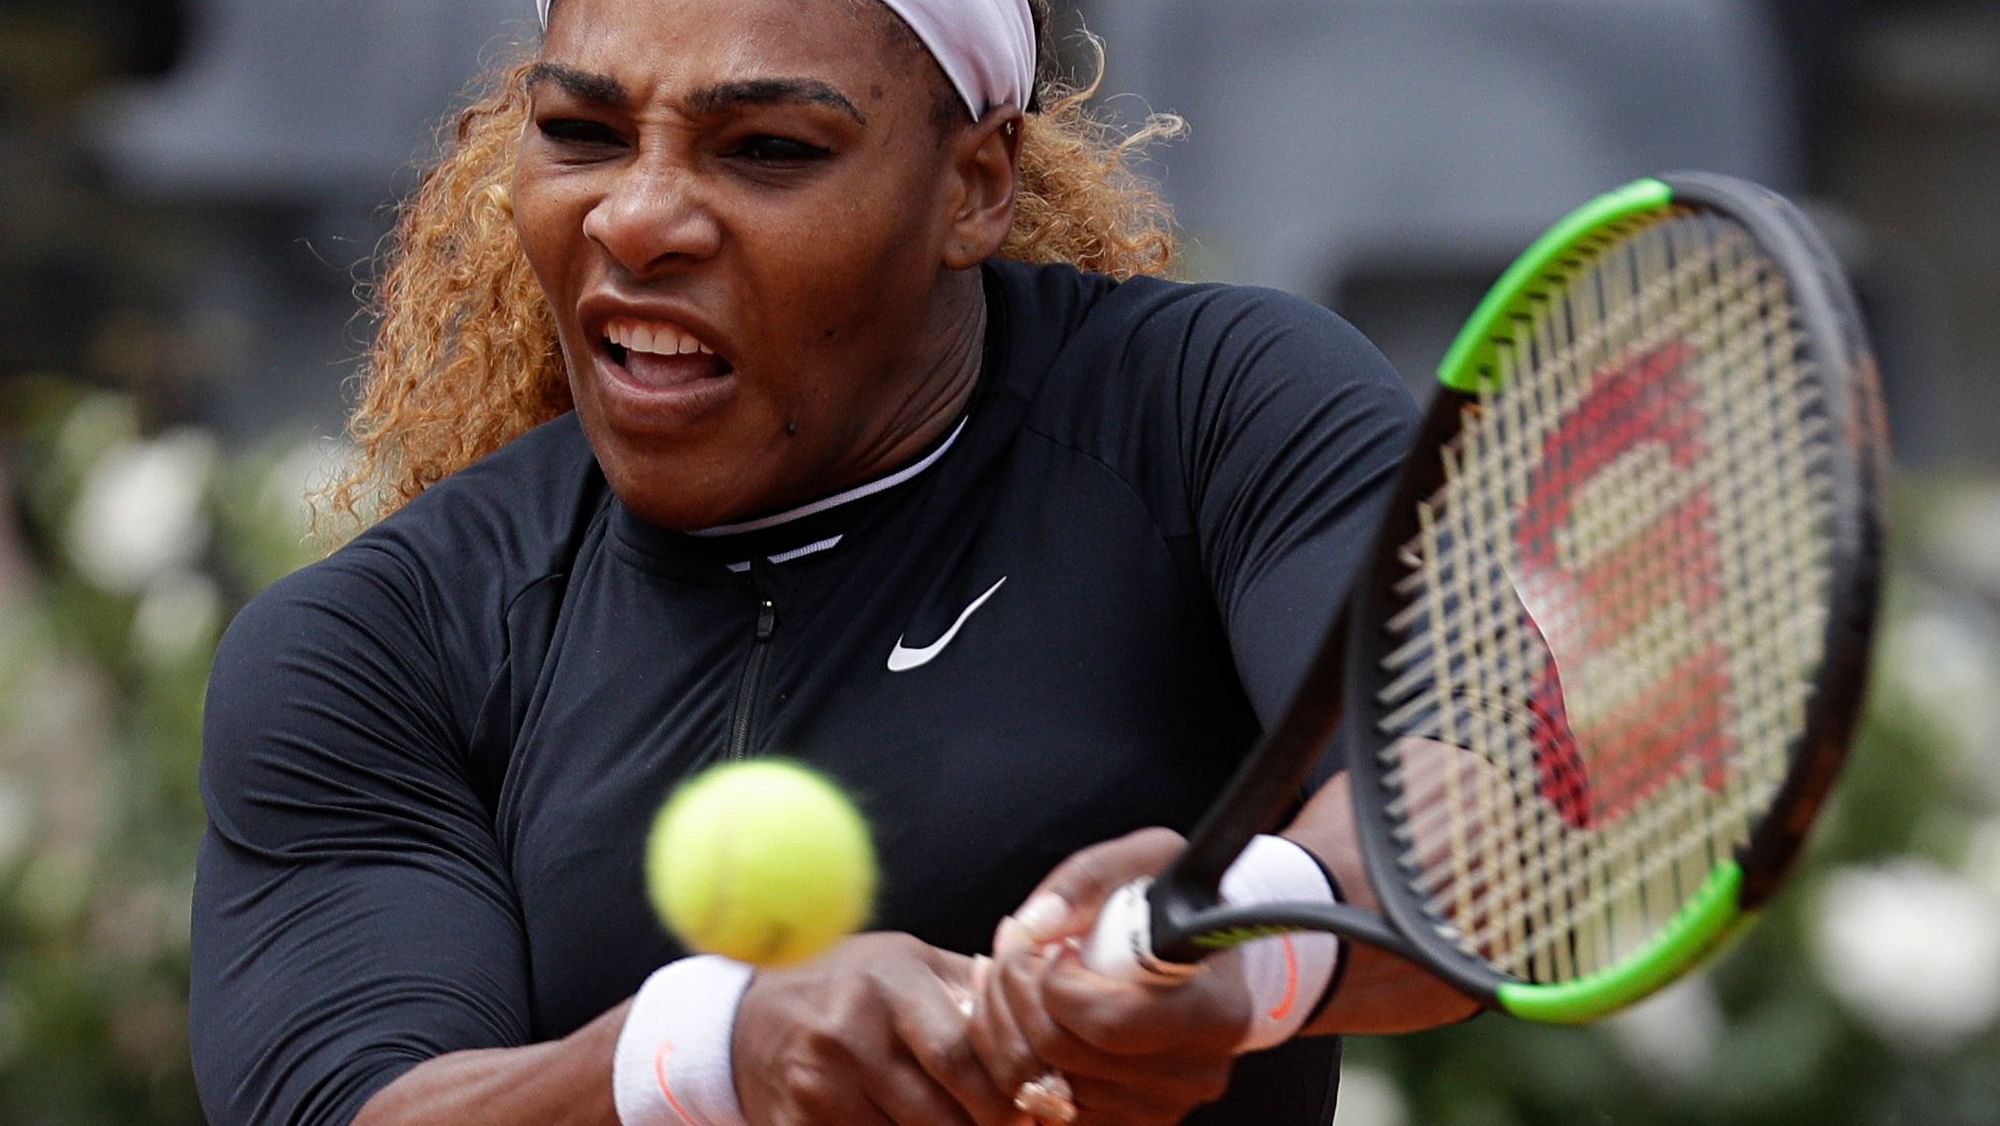 The next tournament on Serena’s schedule is Roland Garros, which starts in less than two weeks.